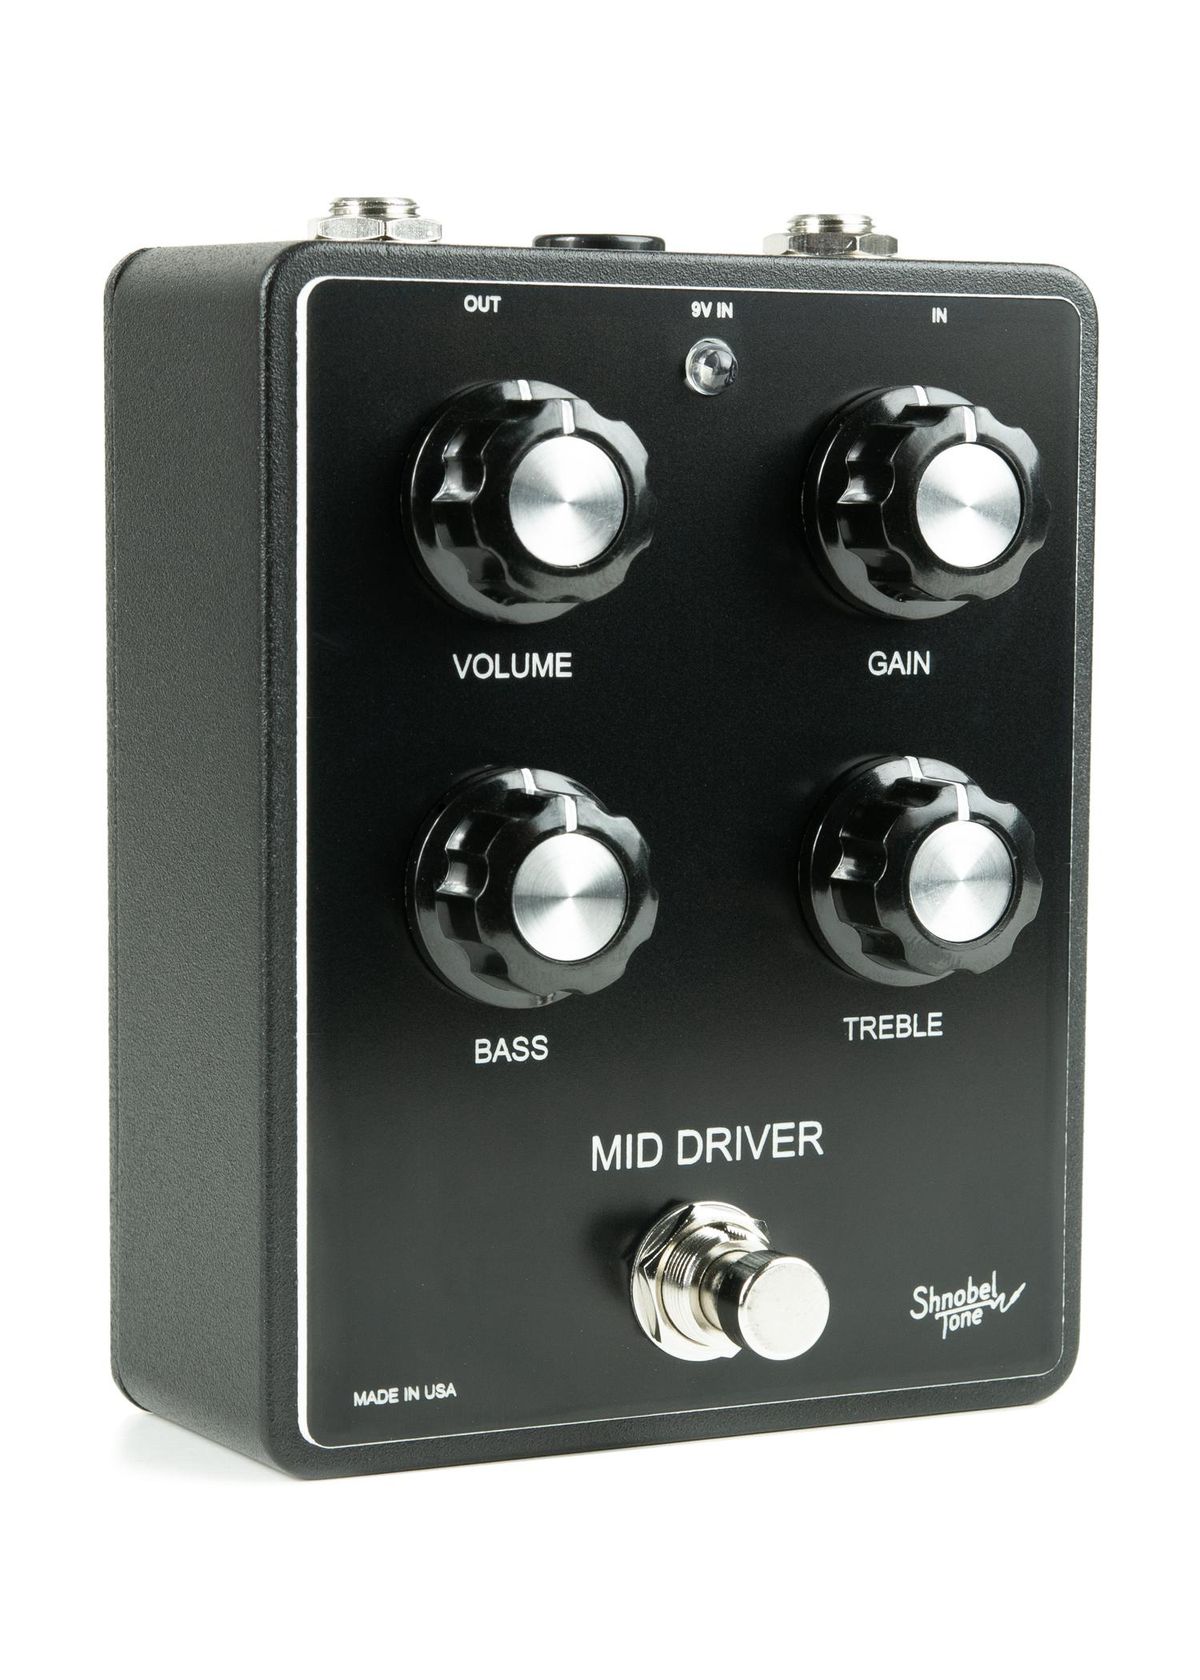 Shnobel Tone Unveils the Mid Driver Overdrive